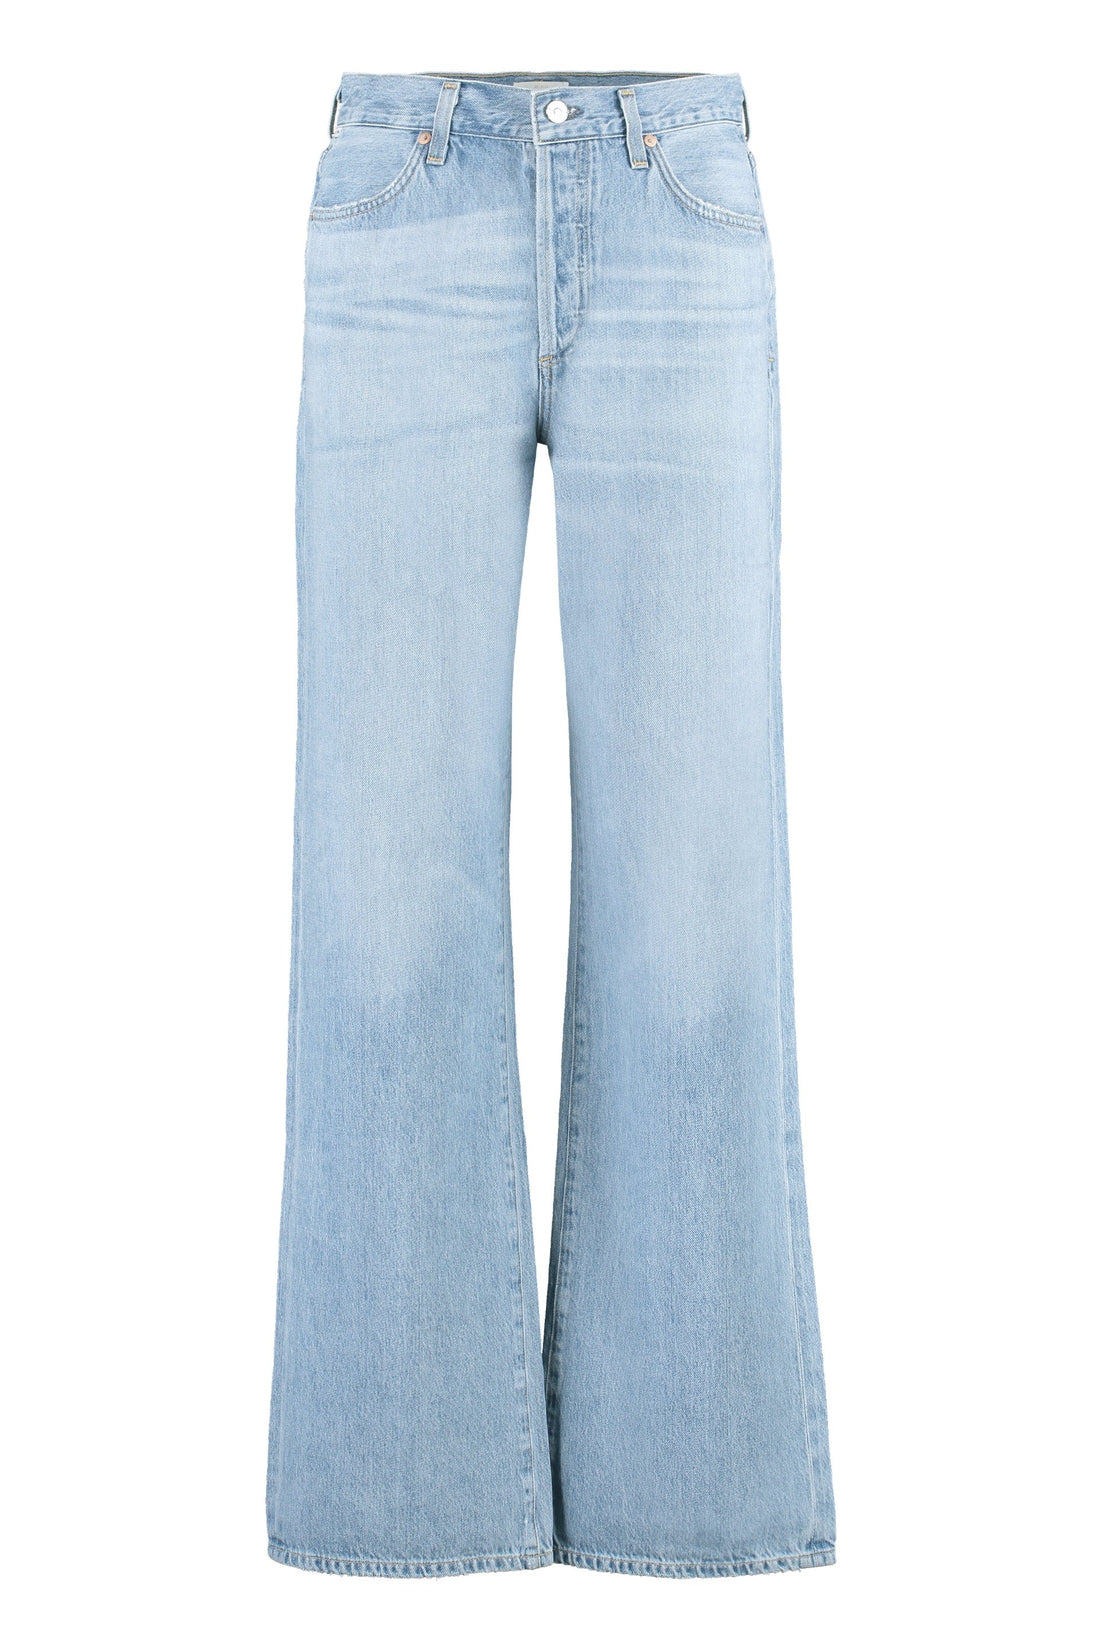 Citizens of Humanity-OUTLET-SALE-Annina wide-leg jeans-ARCHIVIST